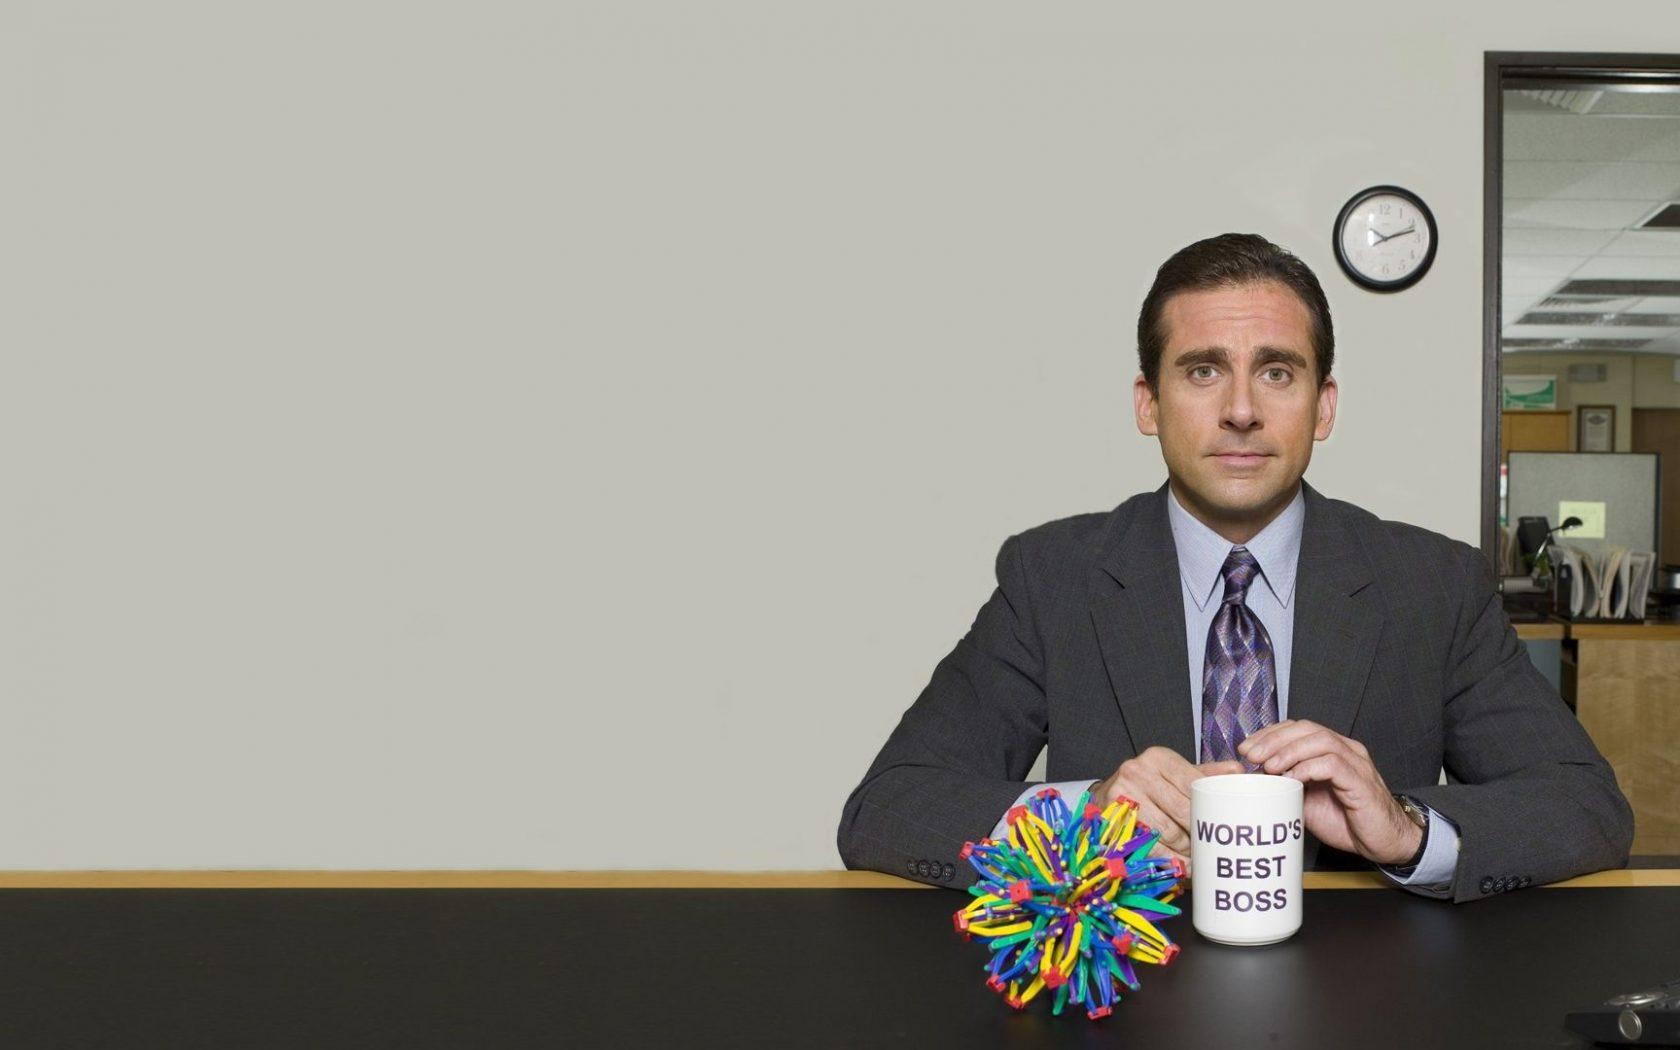 HD Wallpaper Of Michael Scott And His World's Best Boss Cup